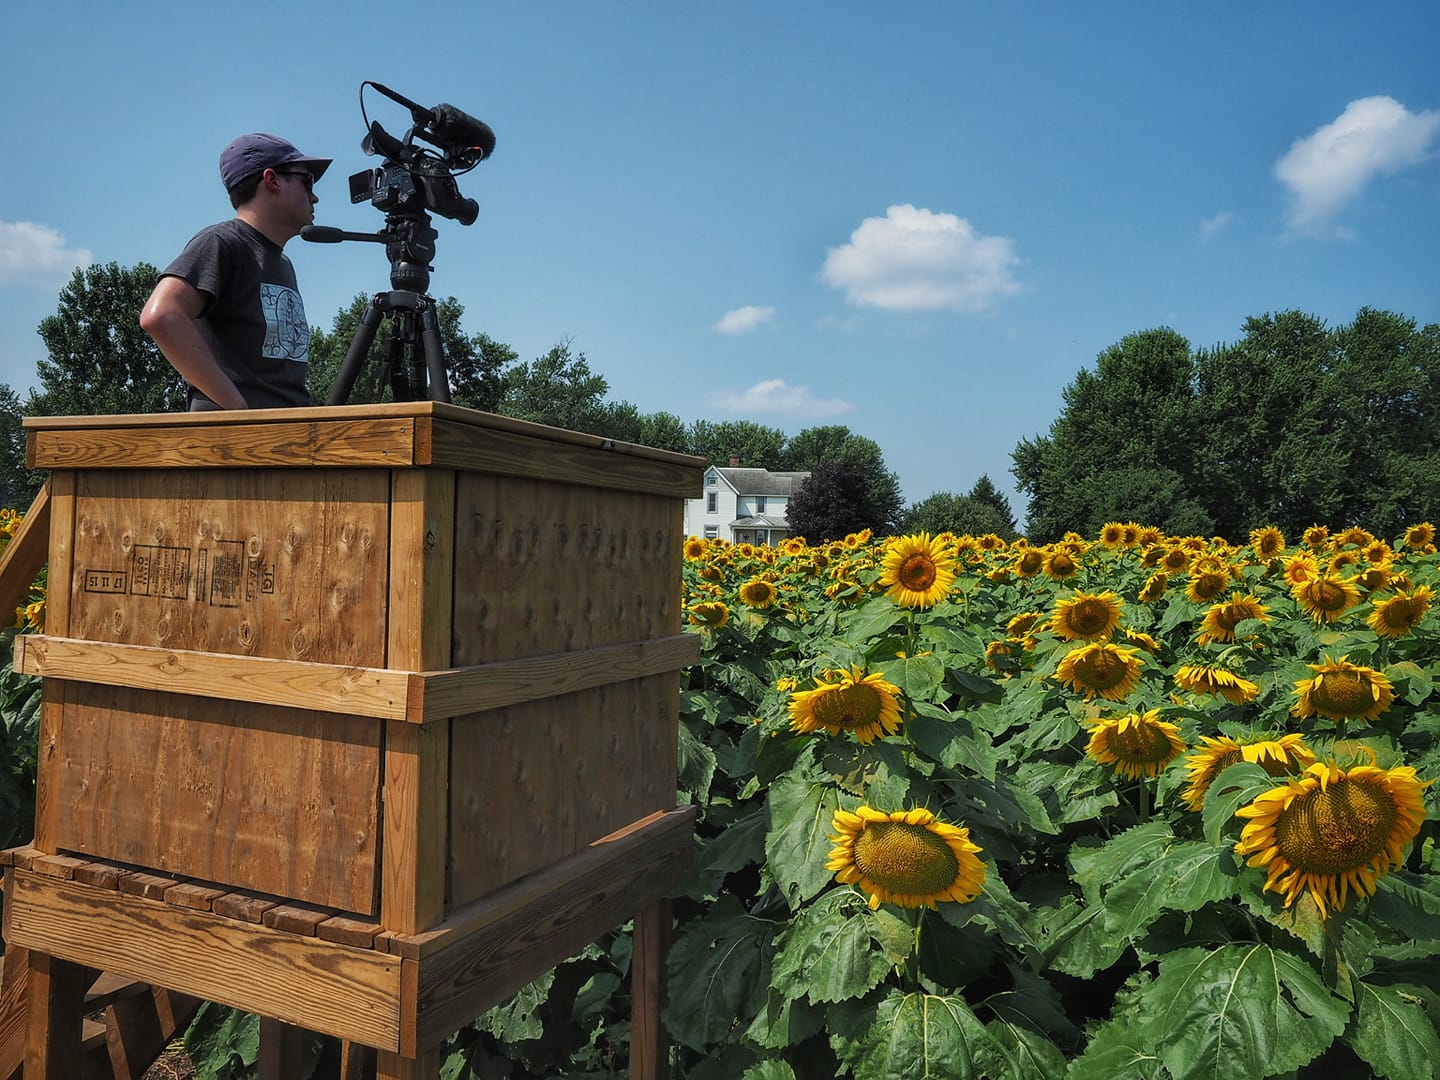 Ryan Ward films a Wisconsin Life story from an observation tower in the middle of a rural sunflower field